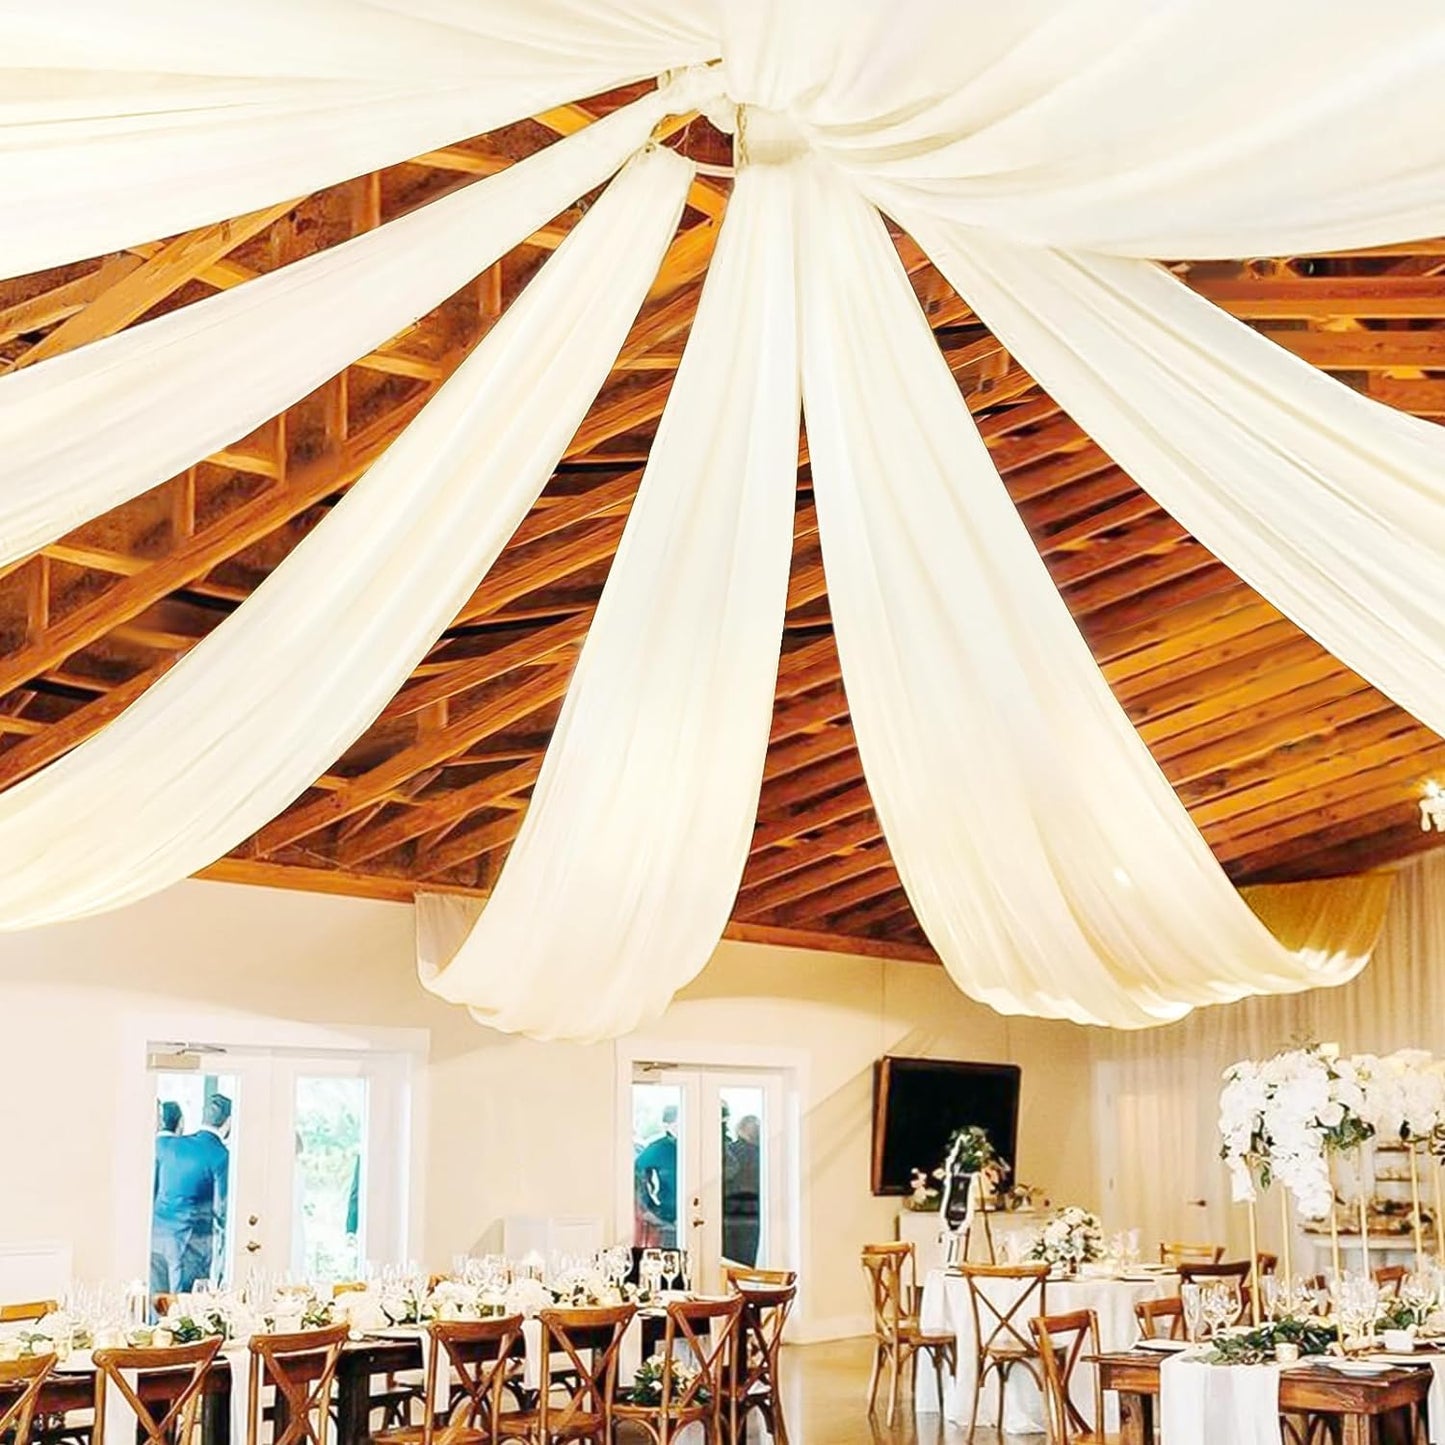 6 Panels White Ceiling Drapes for Wedding Ceiling Drapes 5Ftx20Ft Wedding Arch Draping Fabric Sheer Curtains Voile Chiffon Drapery Draping Wedding Ceiling Decorations for Party Ceremony Stage Swag  Showgeous Ivory 6 Panel-5Ftx10Ft(60"Wx120"L) 